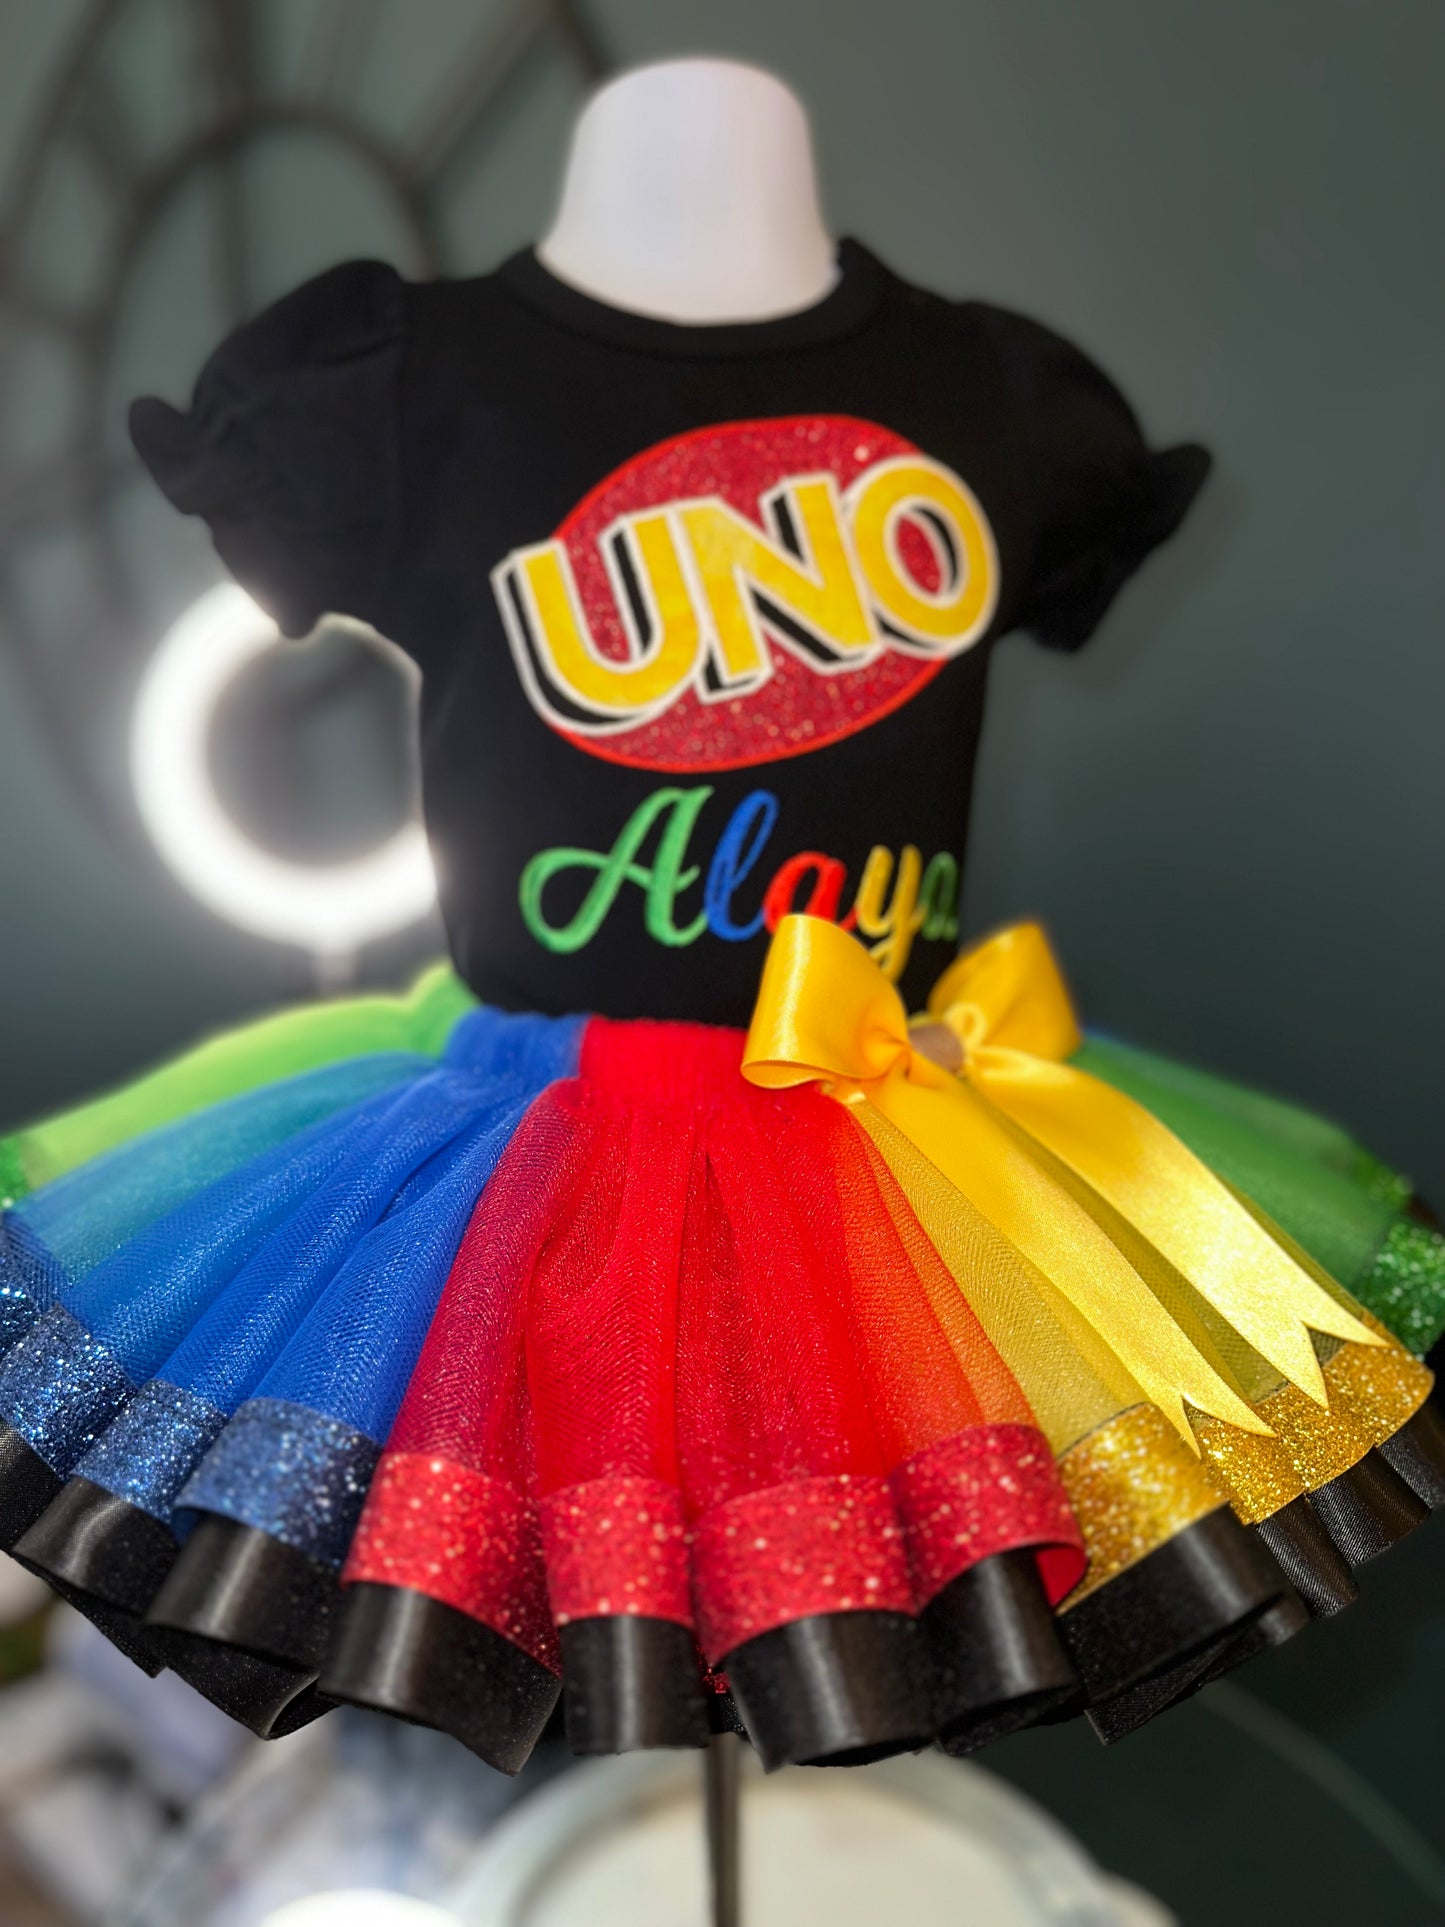 Uno birthday outfit. 1st birthday outfit for girls, theme and ideas